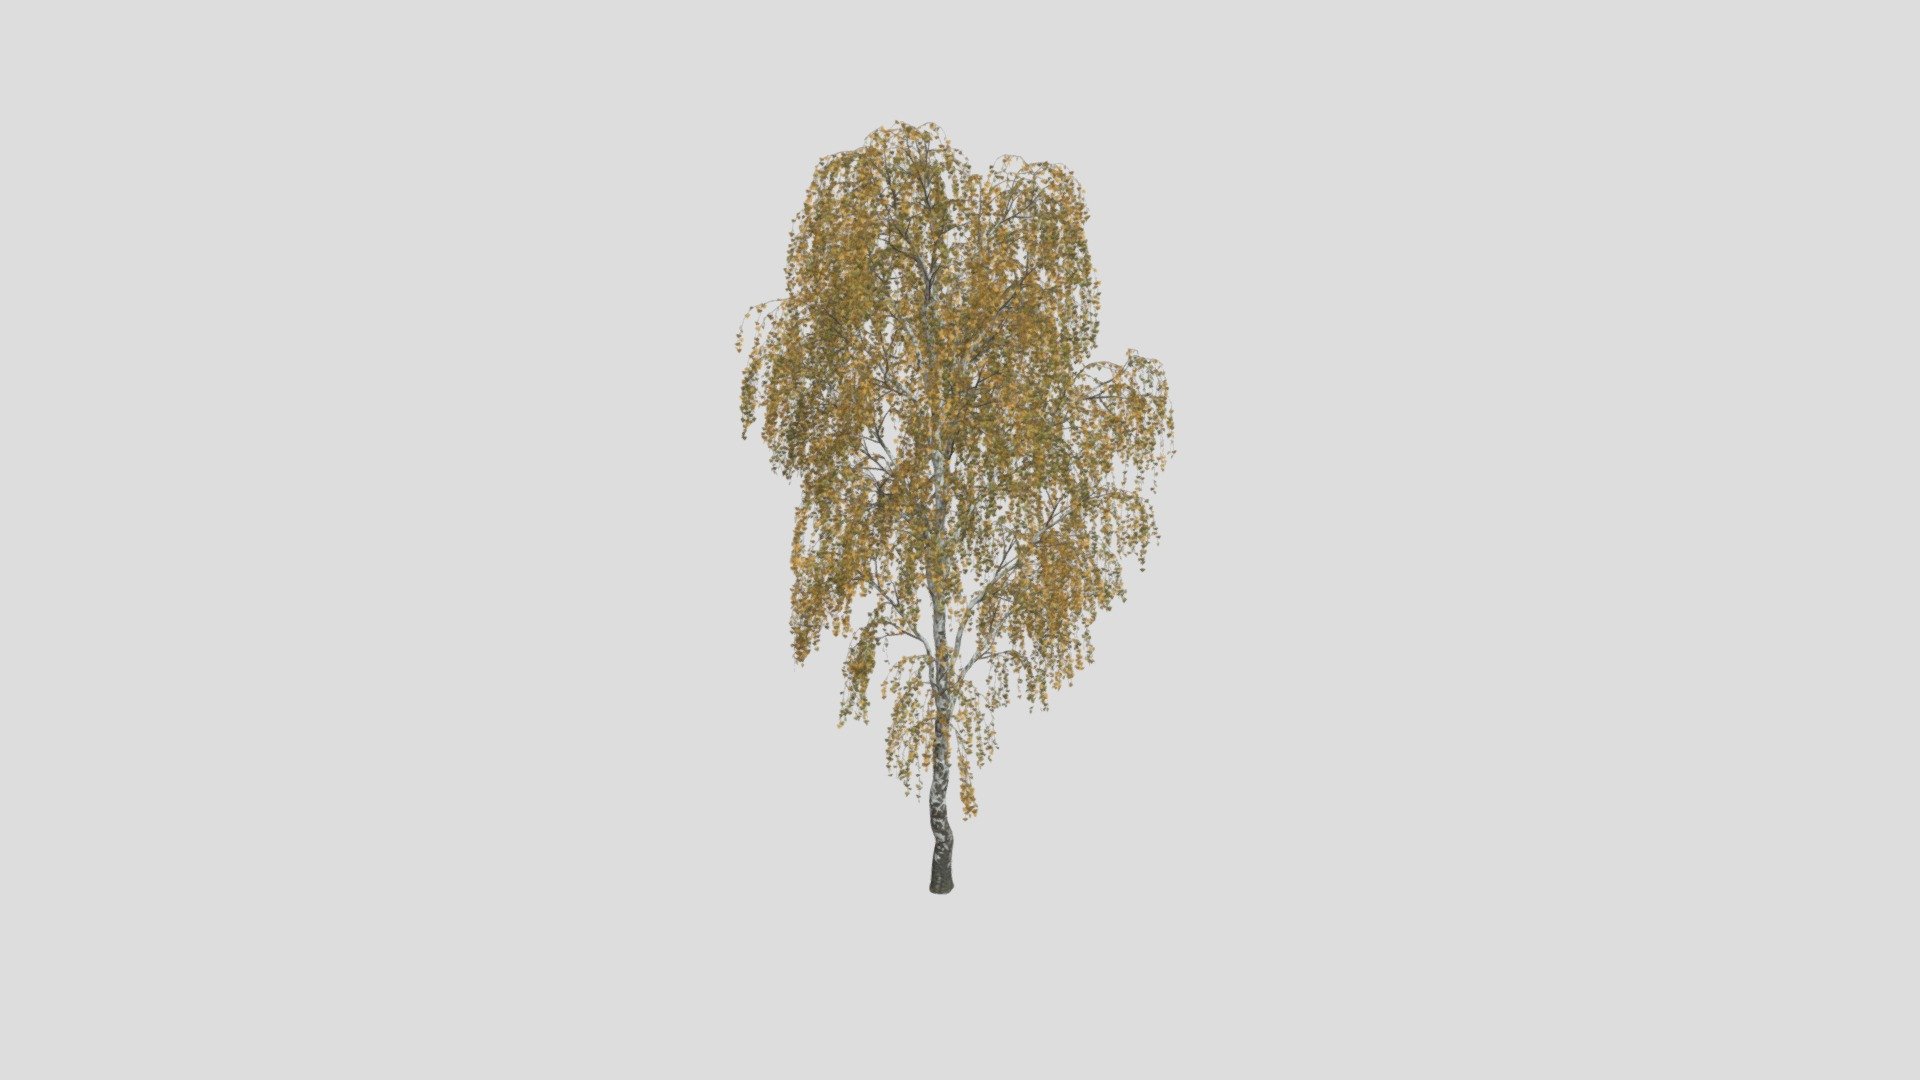 Highly detailed 3d model of autumn birch tree with textures, shaders and materials. It is ready to use, just put it into your scene 3d model